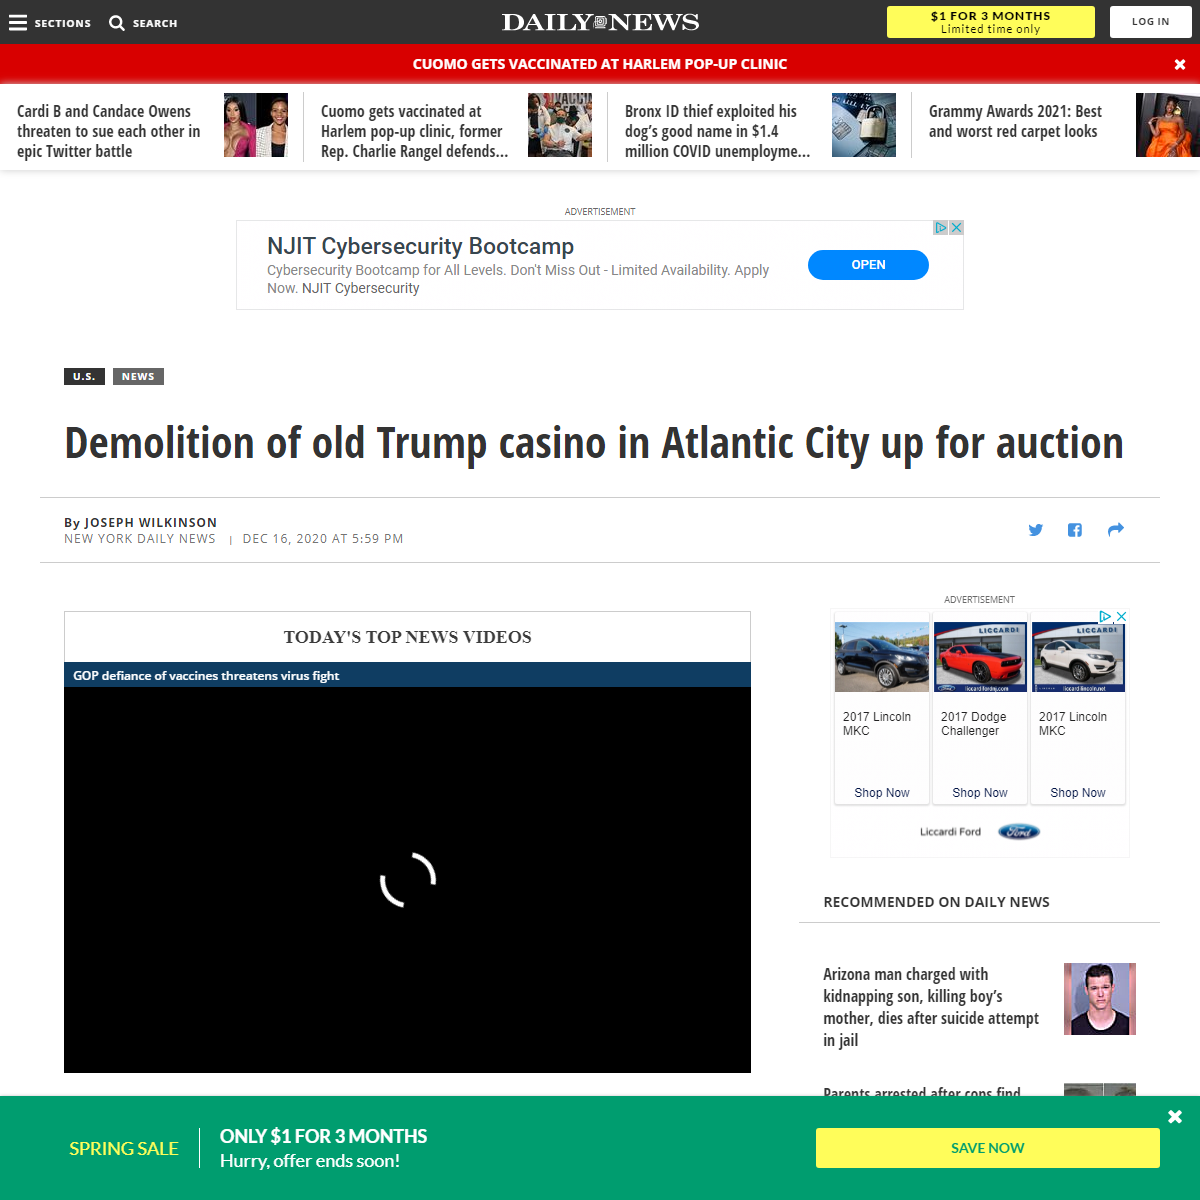 A complete backup of https://www.nydailynews.com/news/national/ny-trump-atlantic-city-casino-demolition-auction-20201216-pp3vaai